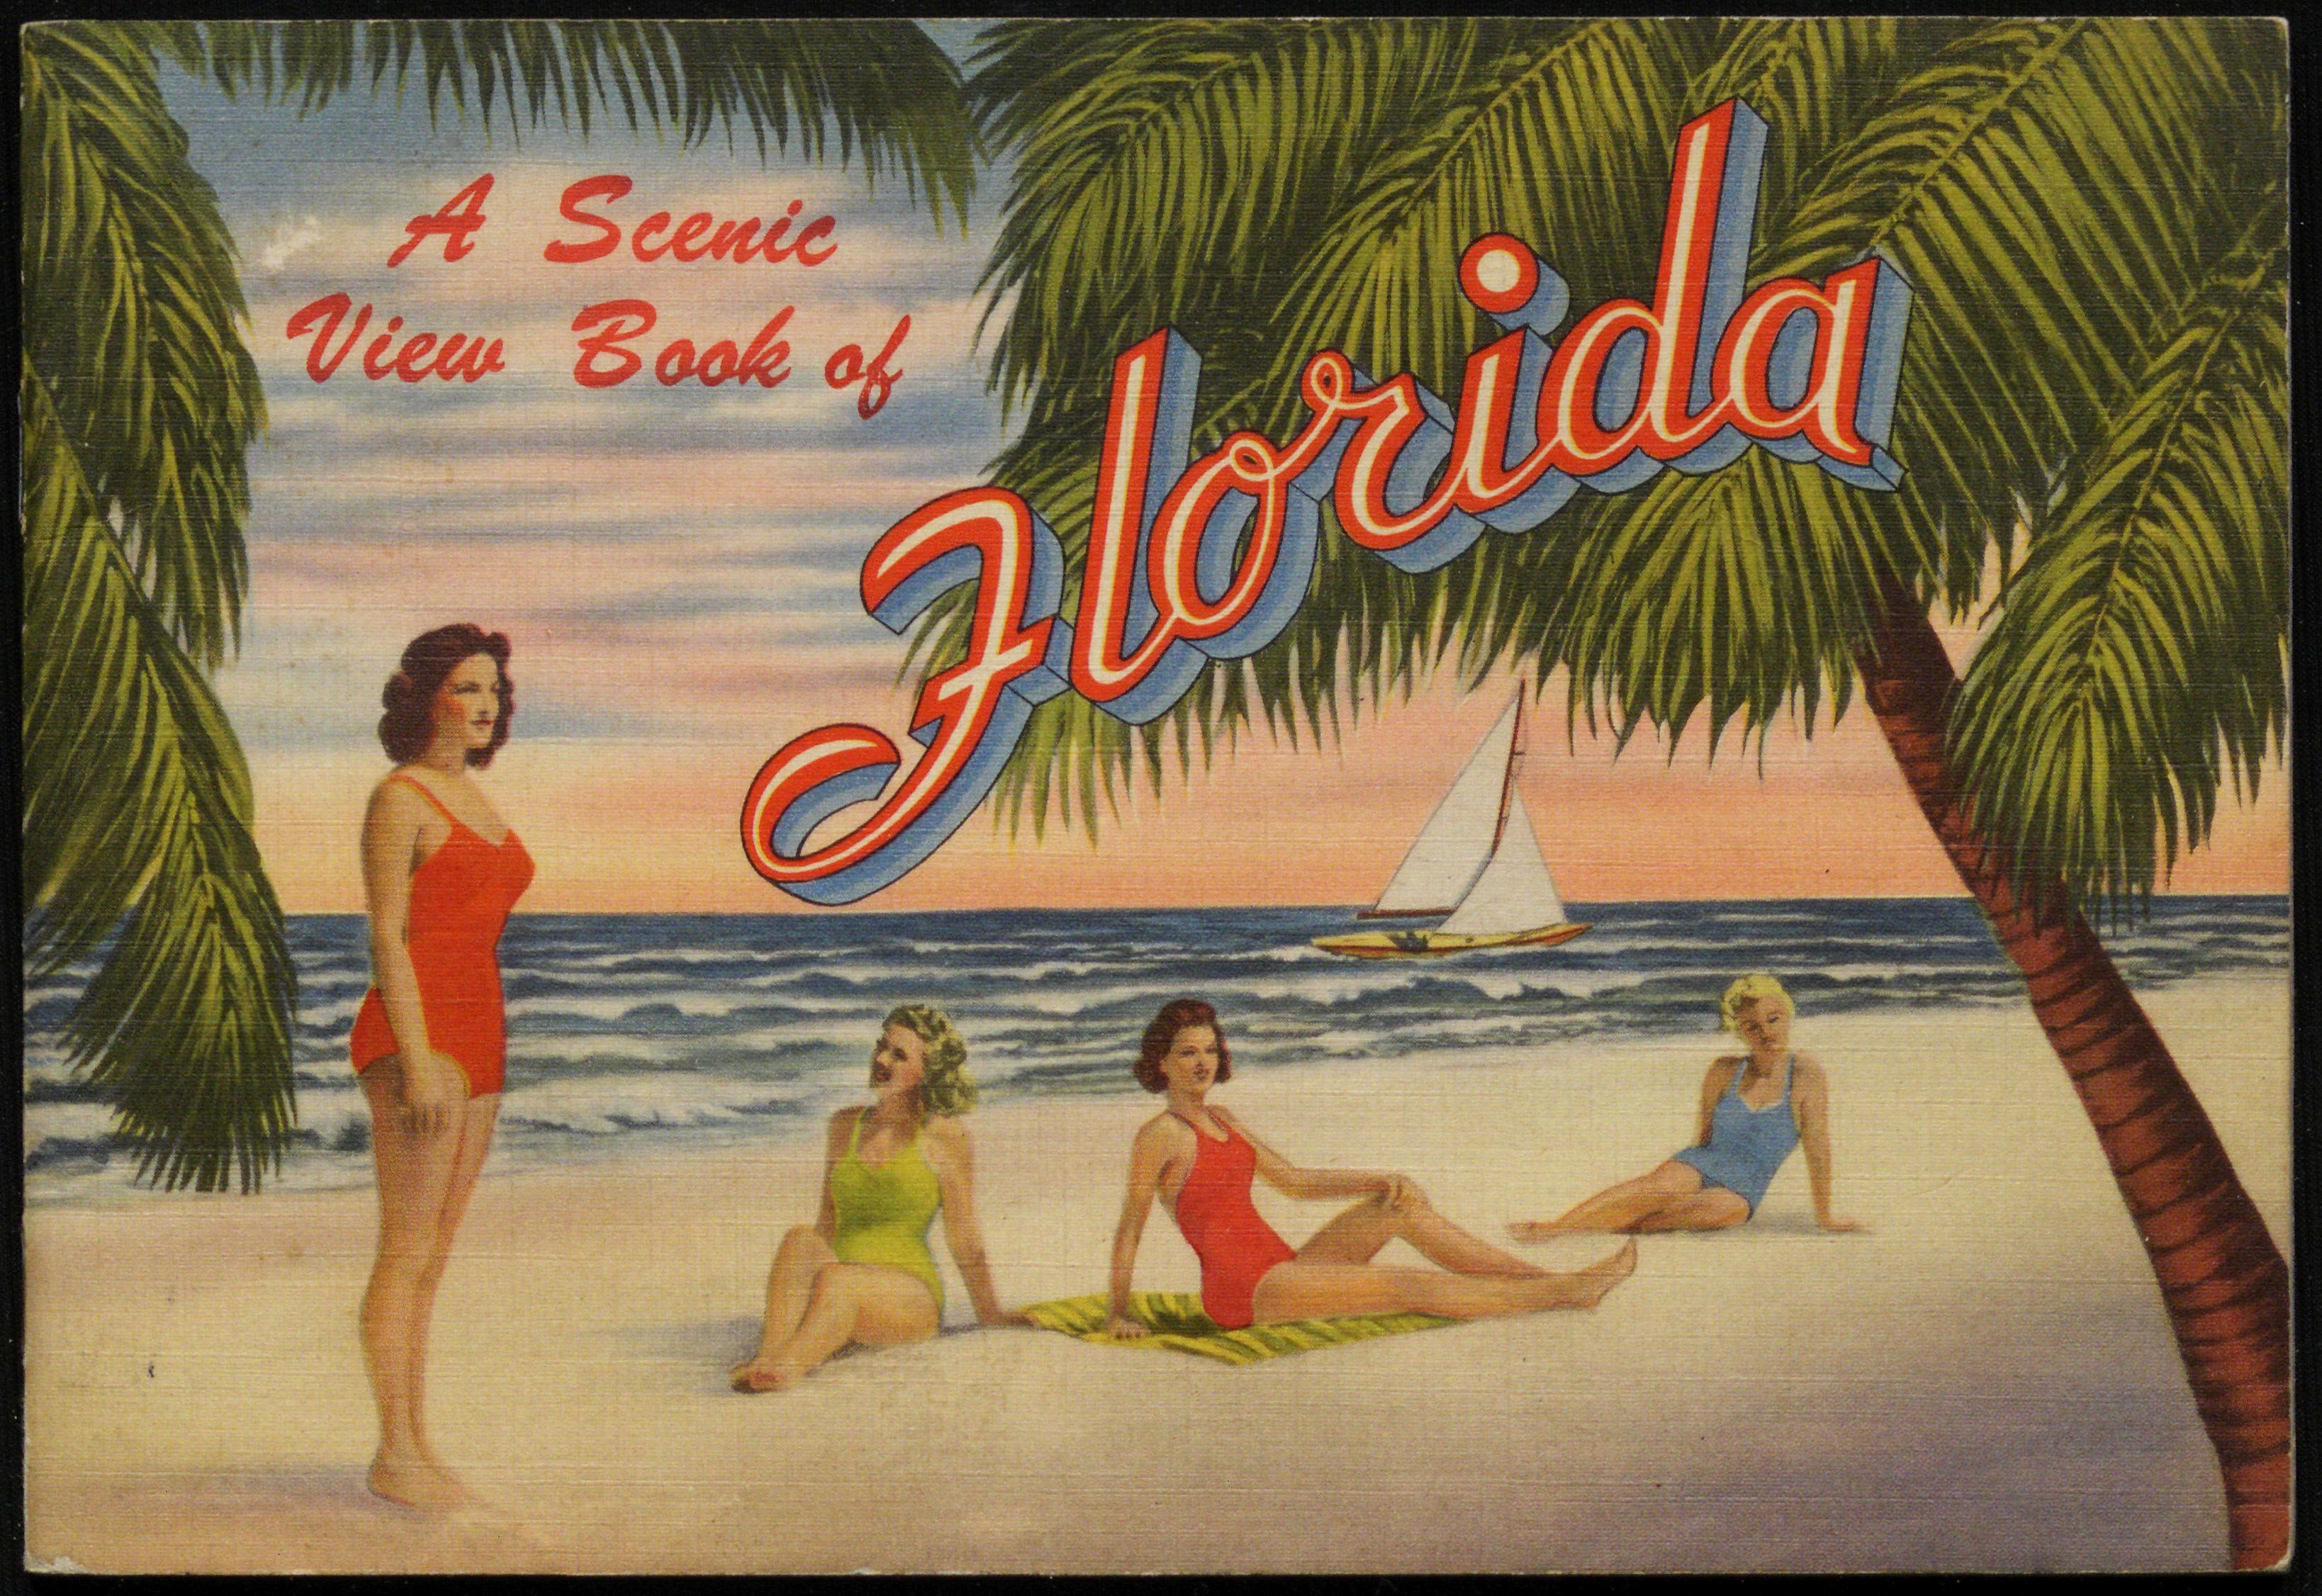 A Scenic View Book of Florida. Copyright University of Florida, George A. Smathers Libraries